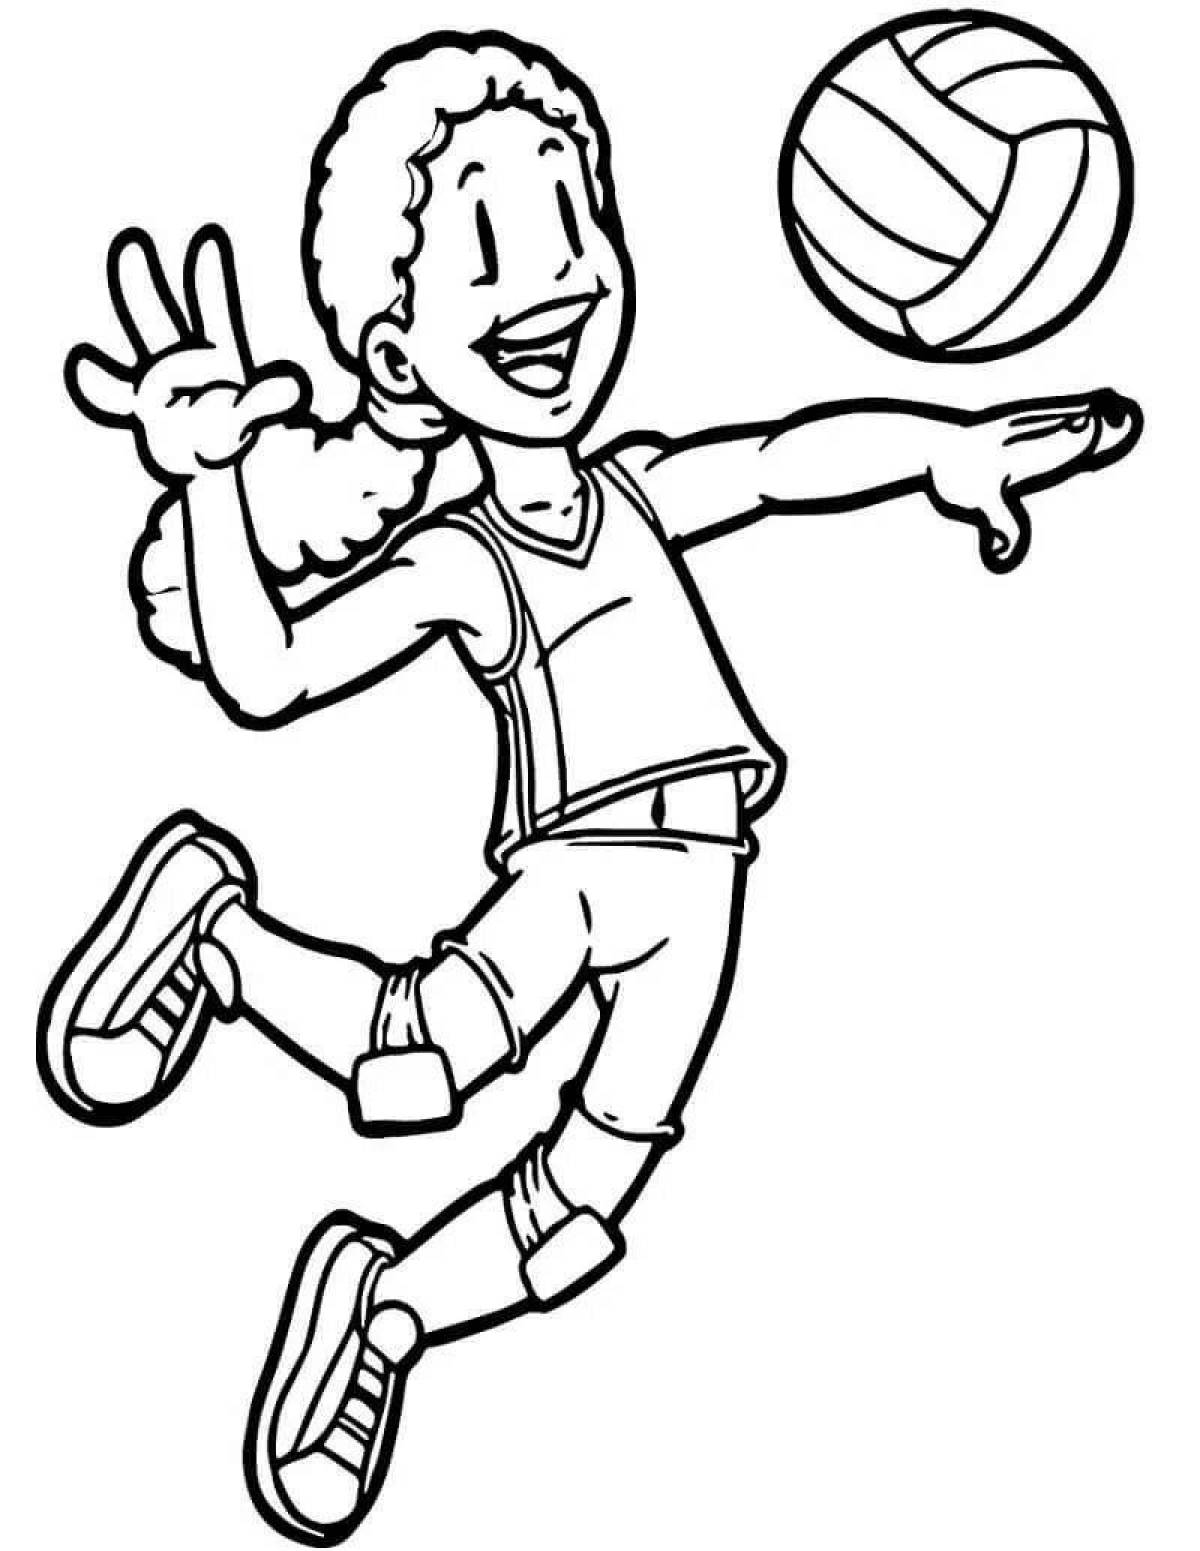 Live Lifestyle Coloring Page